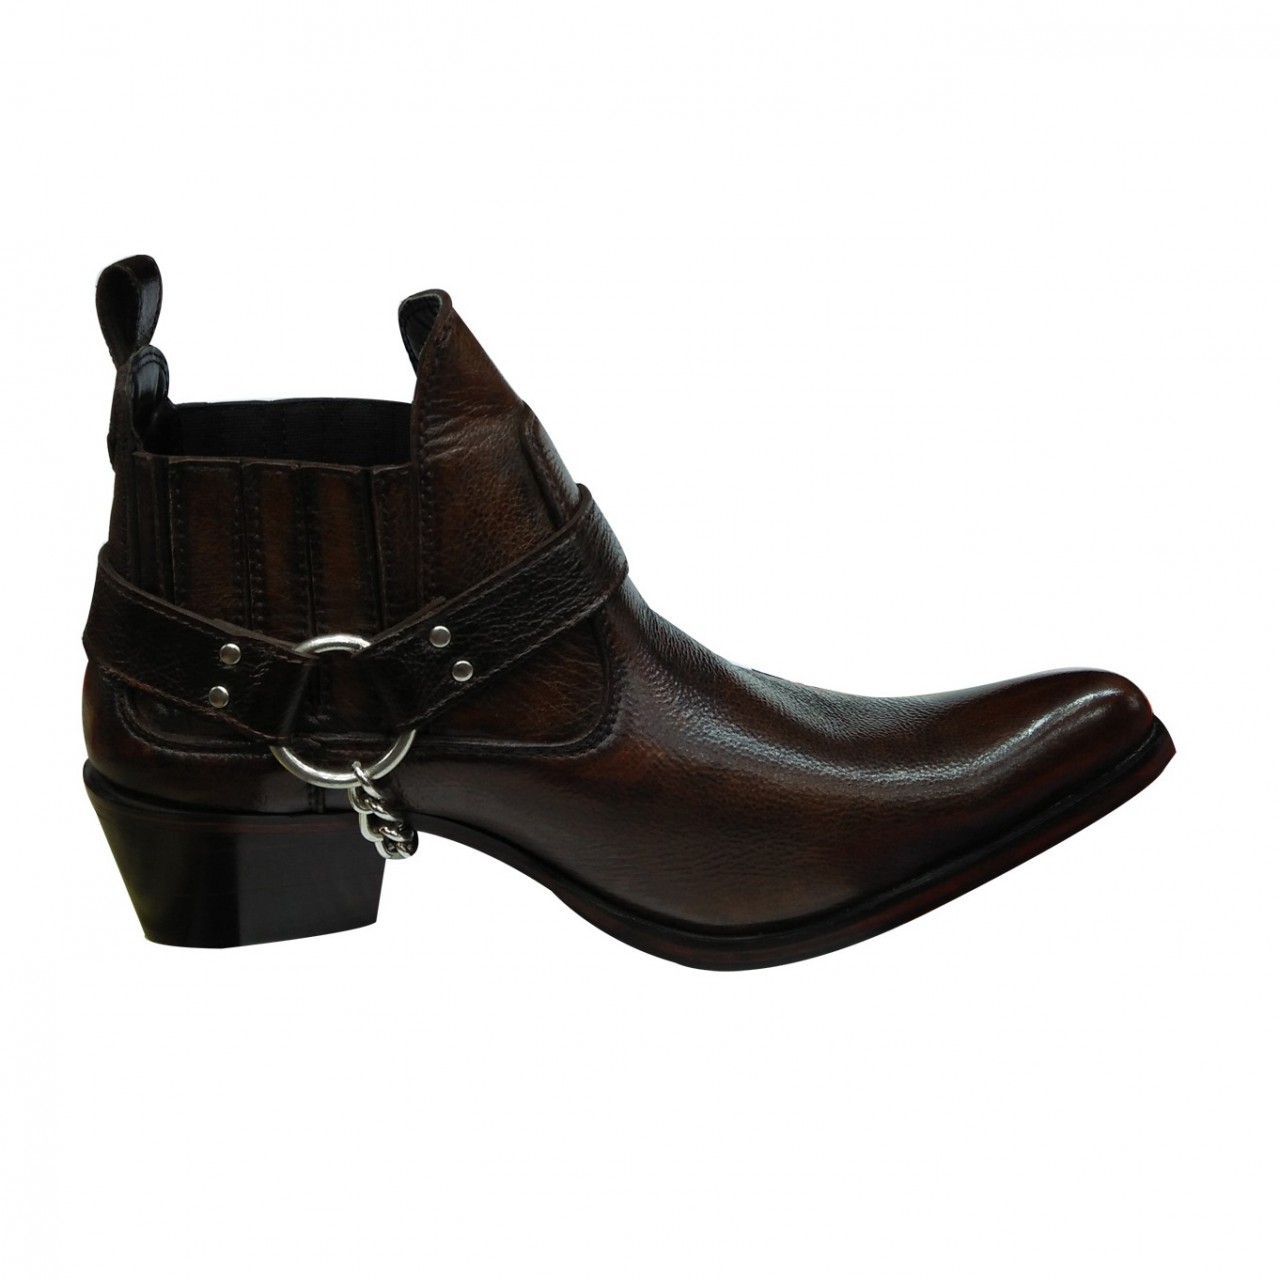 Dark Brown Leather Western Cowboy Boots With side Metal Chain and front sharp curve - For Men